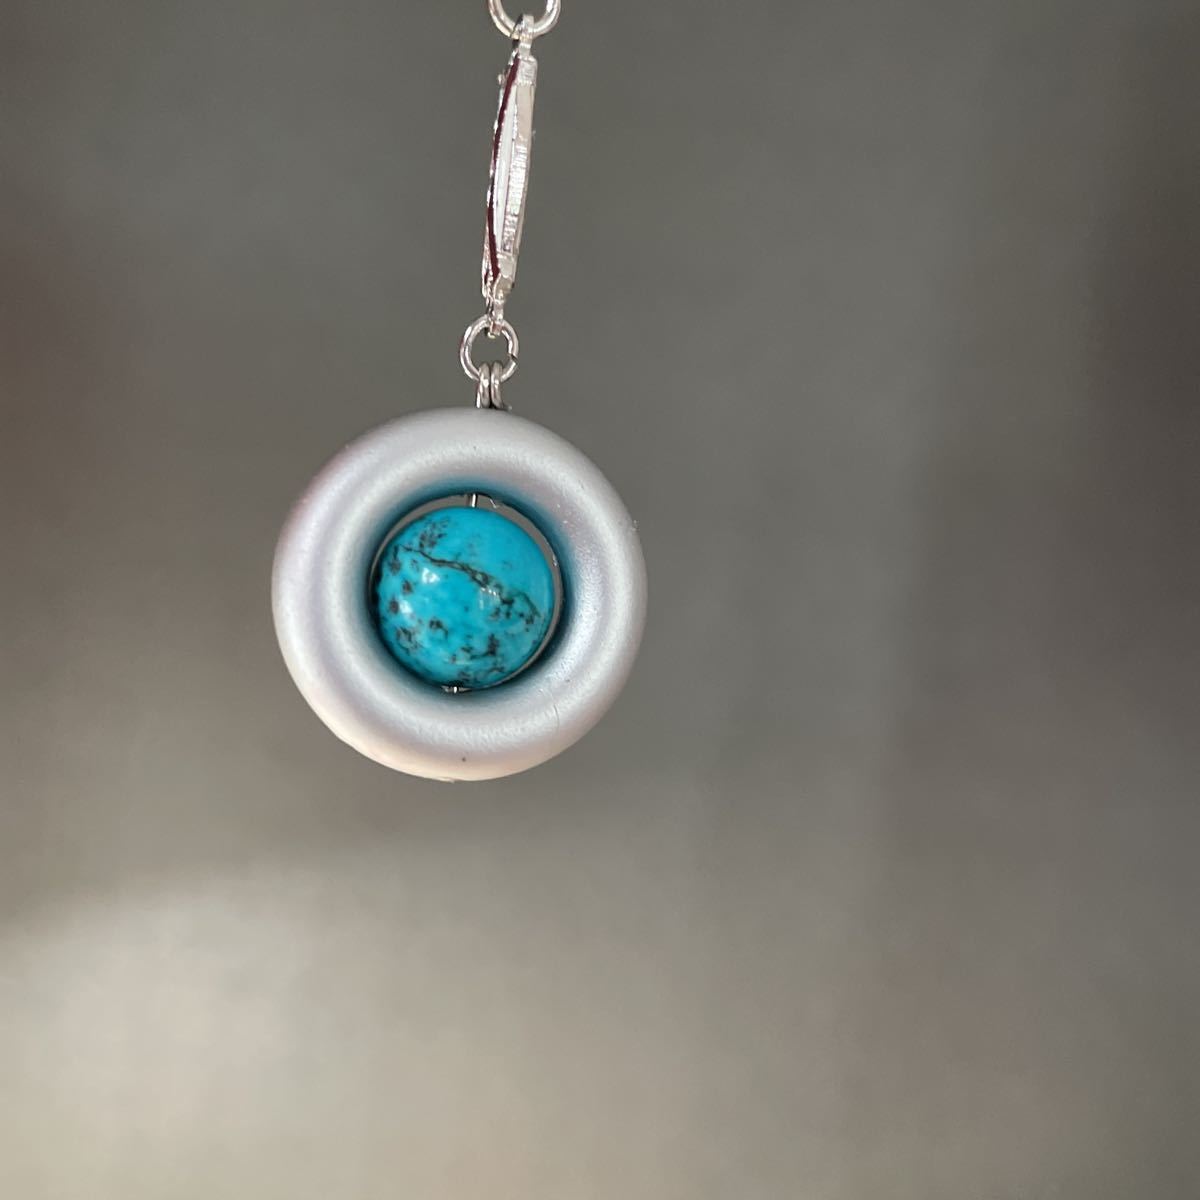  silver ring . turquoise strap # charm 